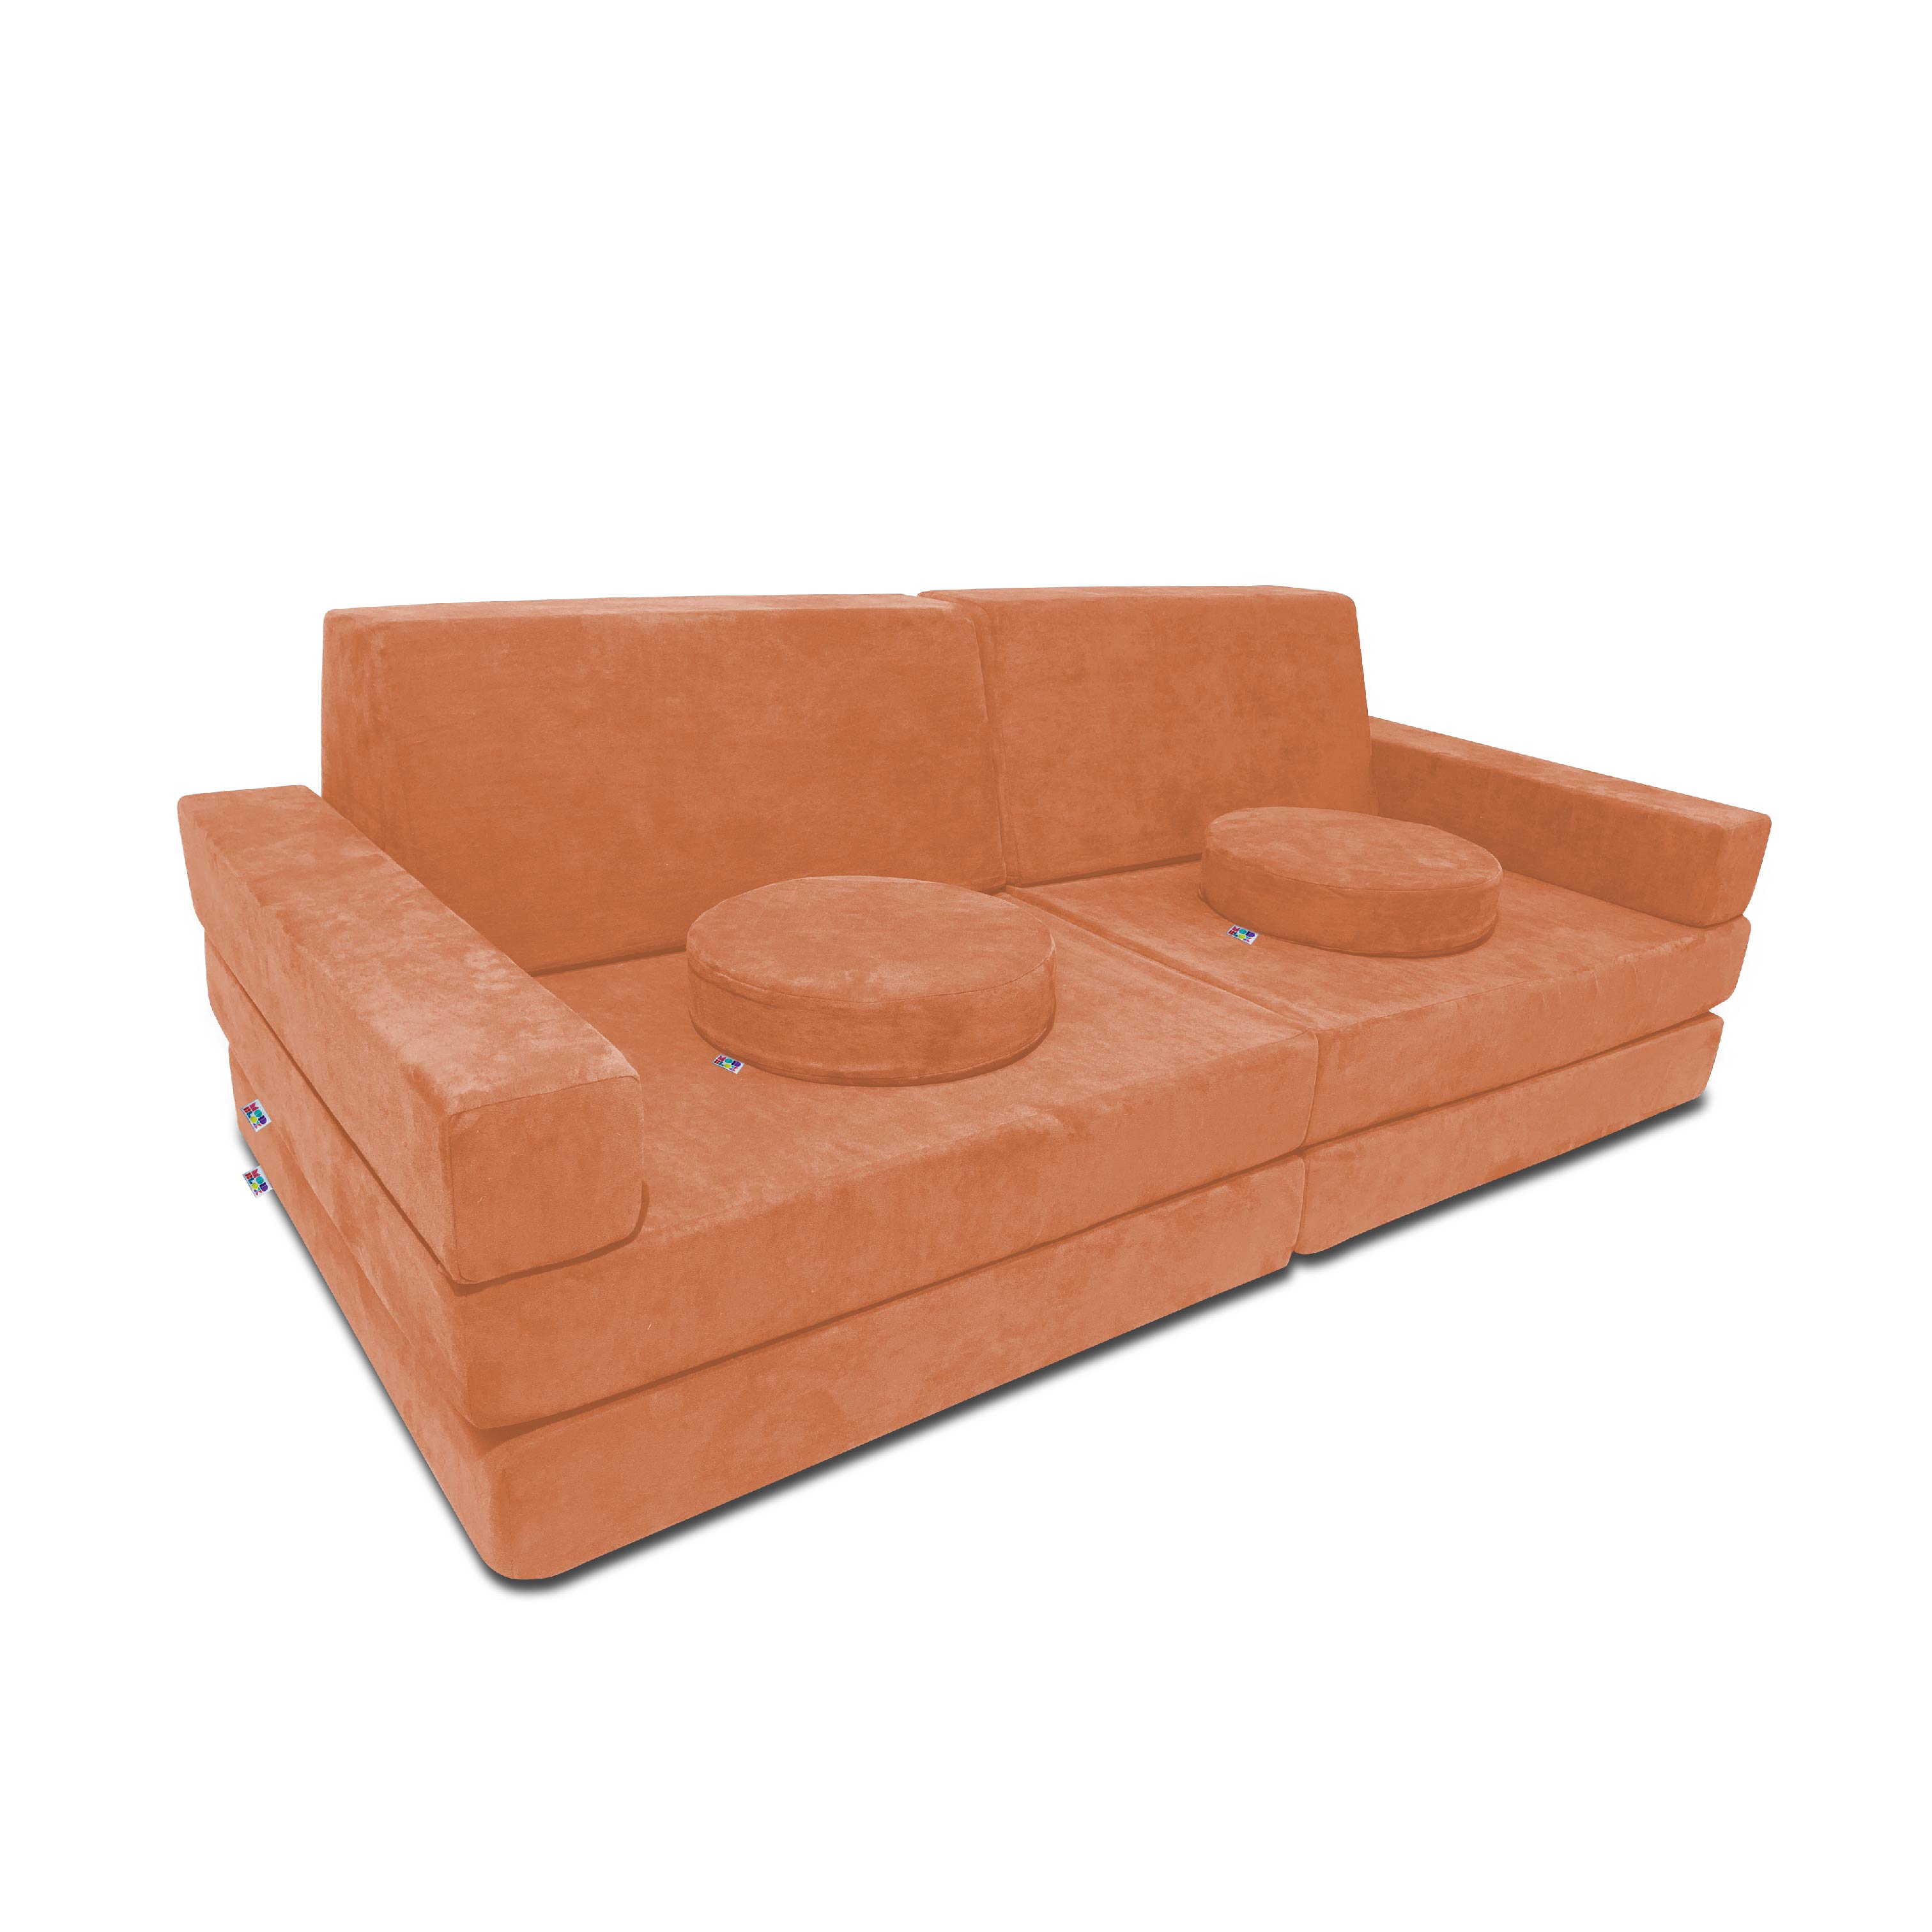 Mod Blox 10 Piece Soft Furniture Playset Modular Microsuede Foam Play Couch for Creative Kids